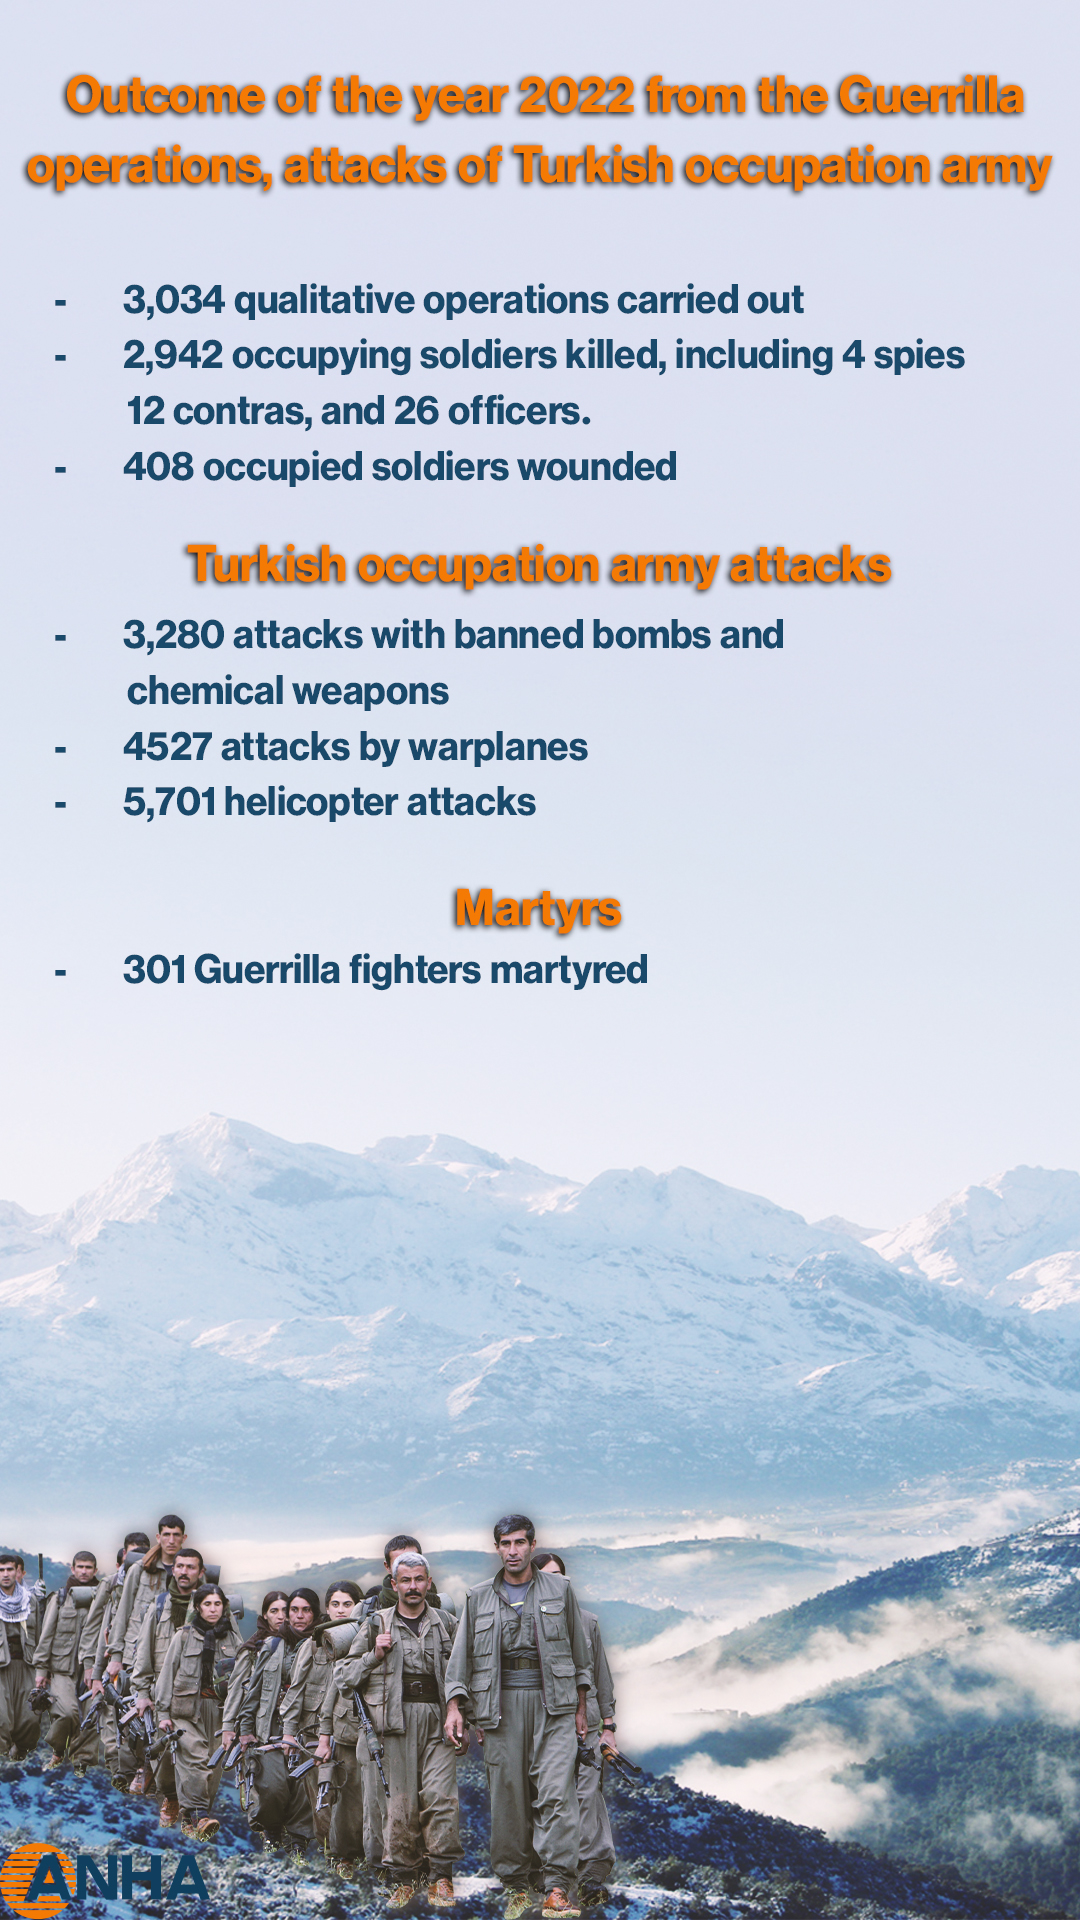 Outcome of the year 2022 from the Guerrilla operations, attacks of Turkish occupation army